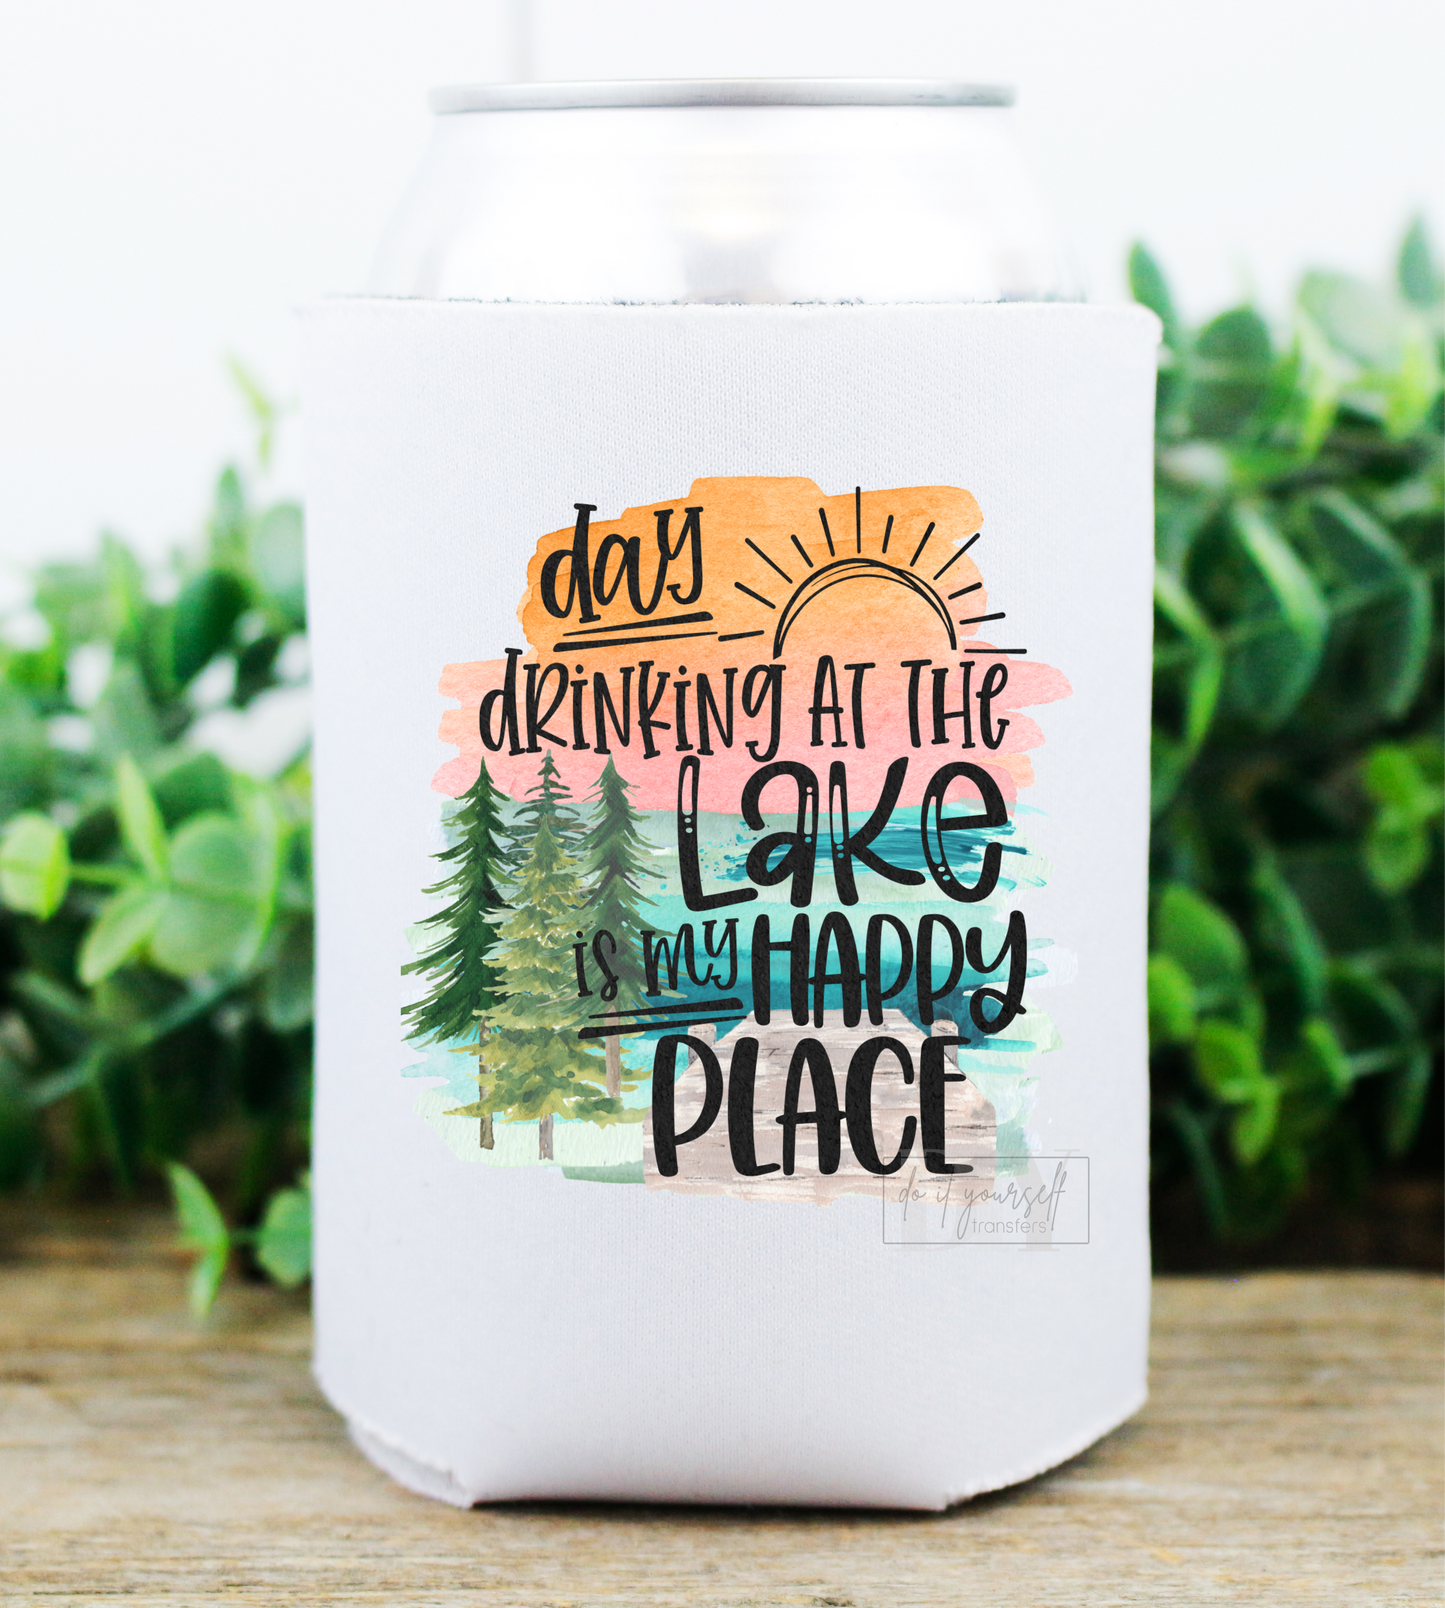 Day drinking at the Lake is my Happy Place  size    DTF TRANSFERPRINT TO ORDER